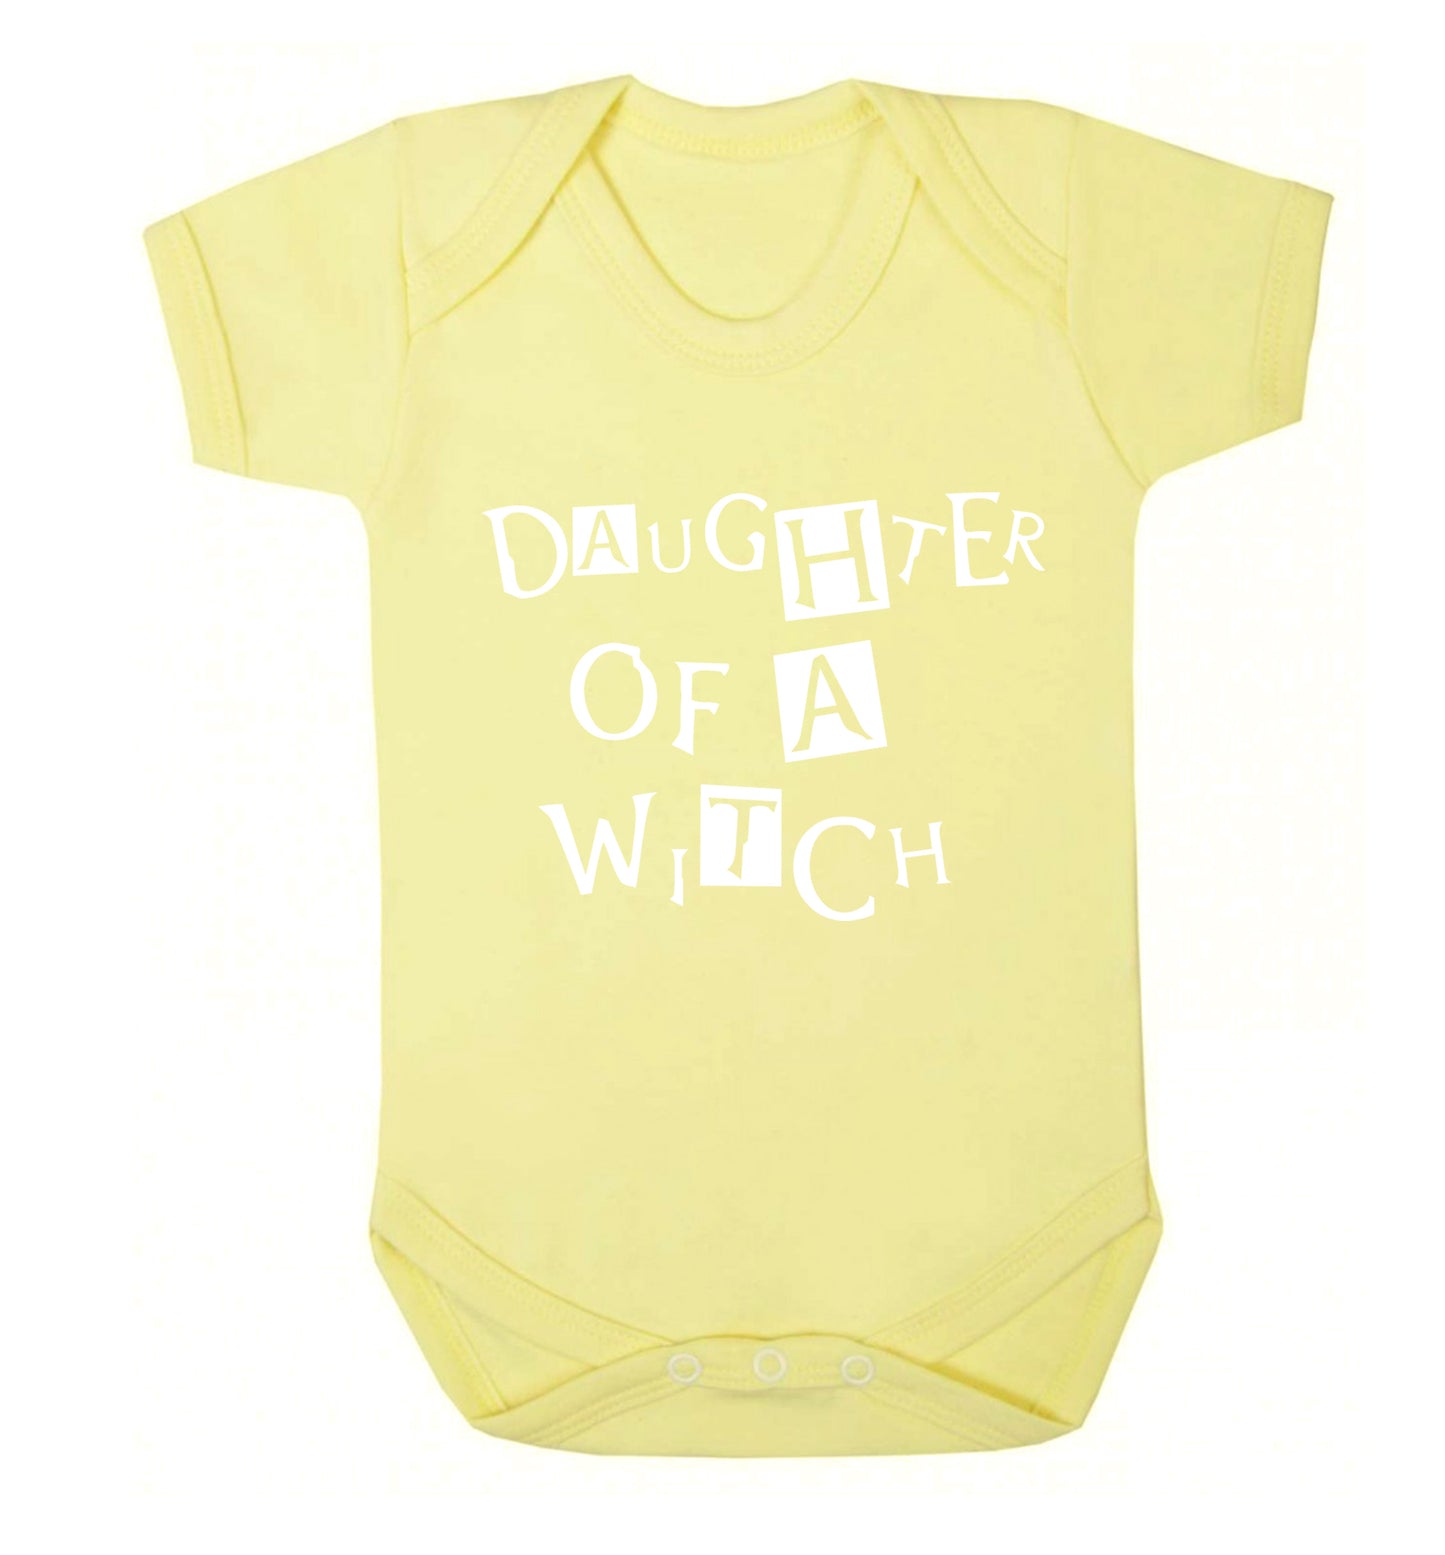 Daughter of a witch Baby Vest pale yellow 18-24 months